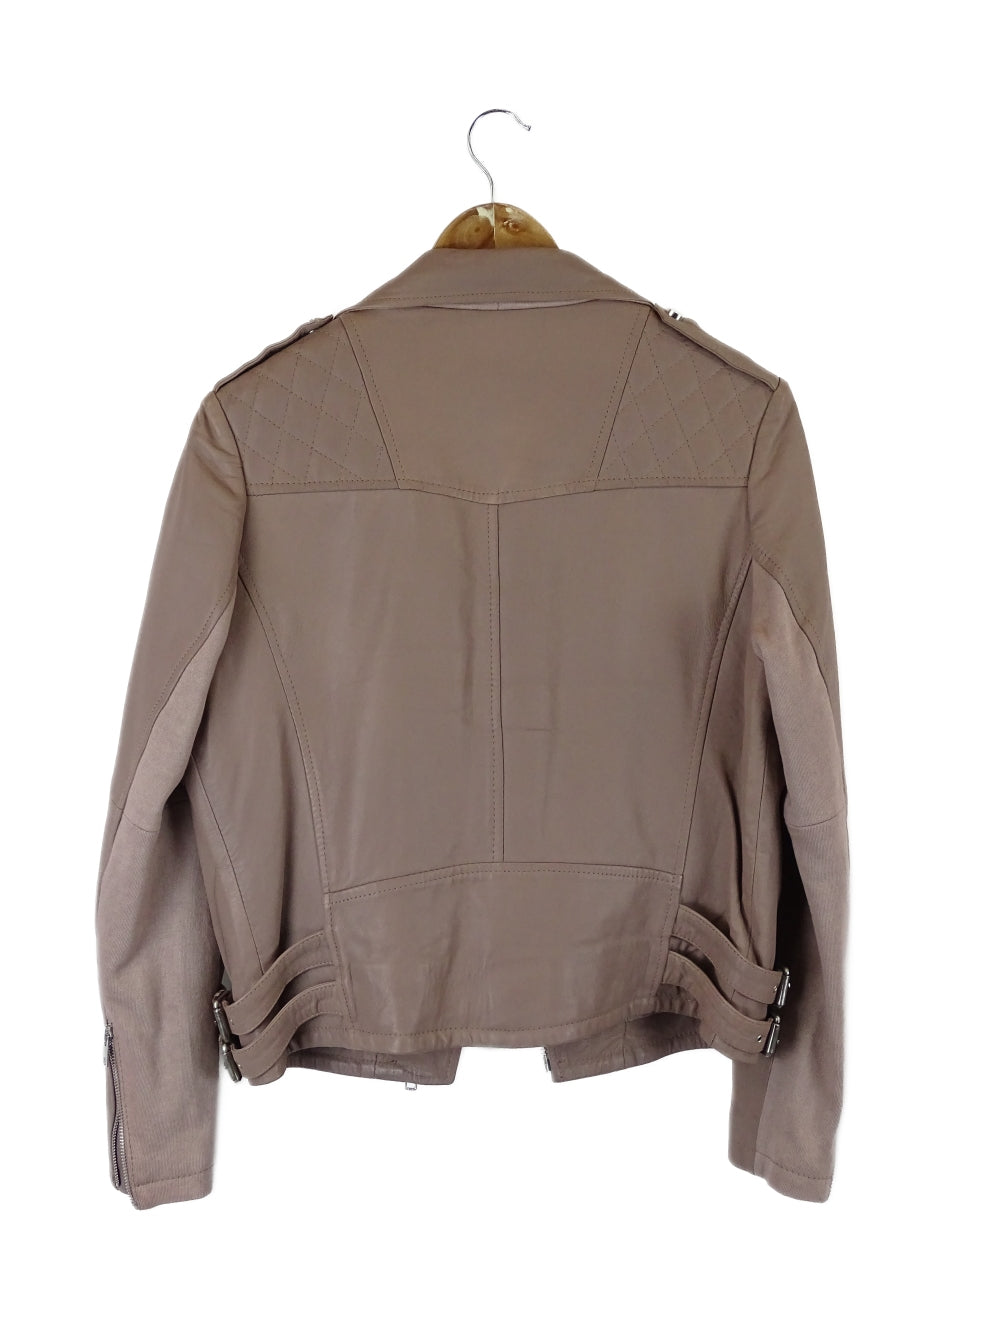 Religion Brown Leather Jacket 14